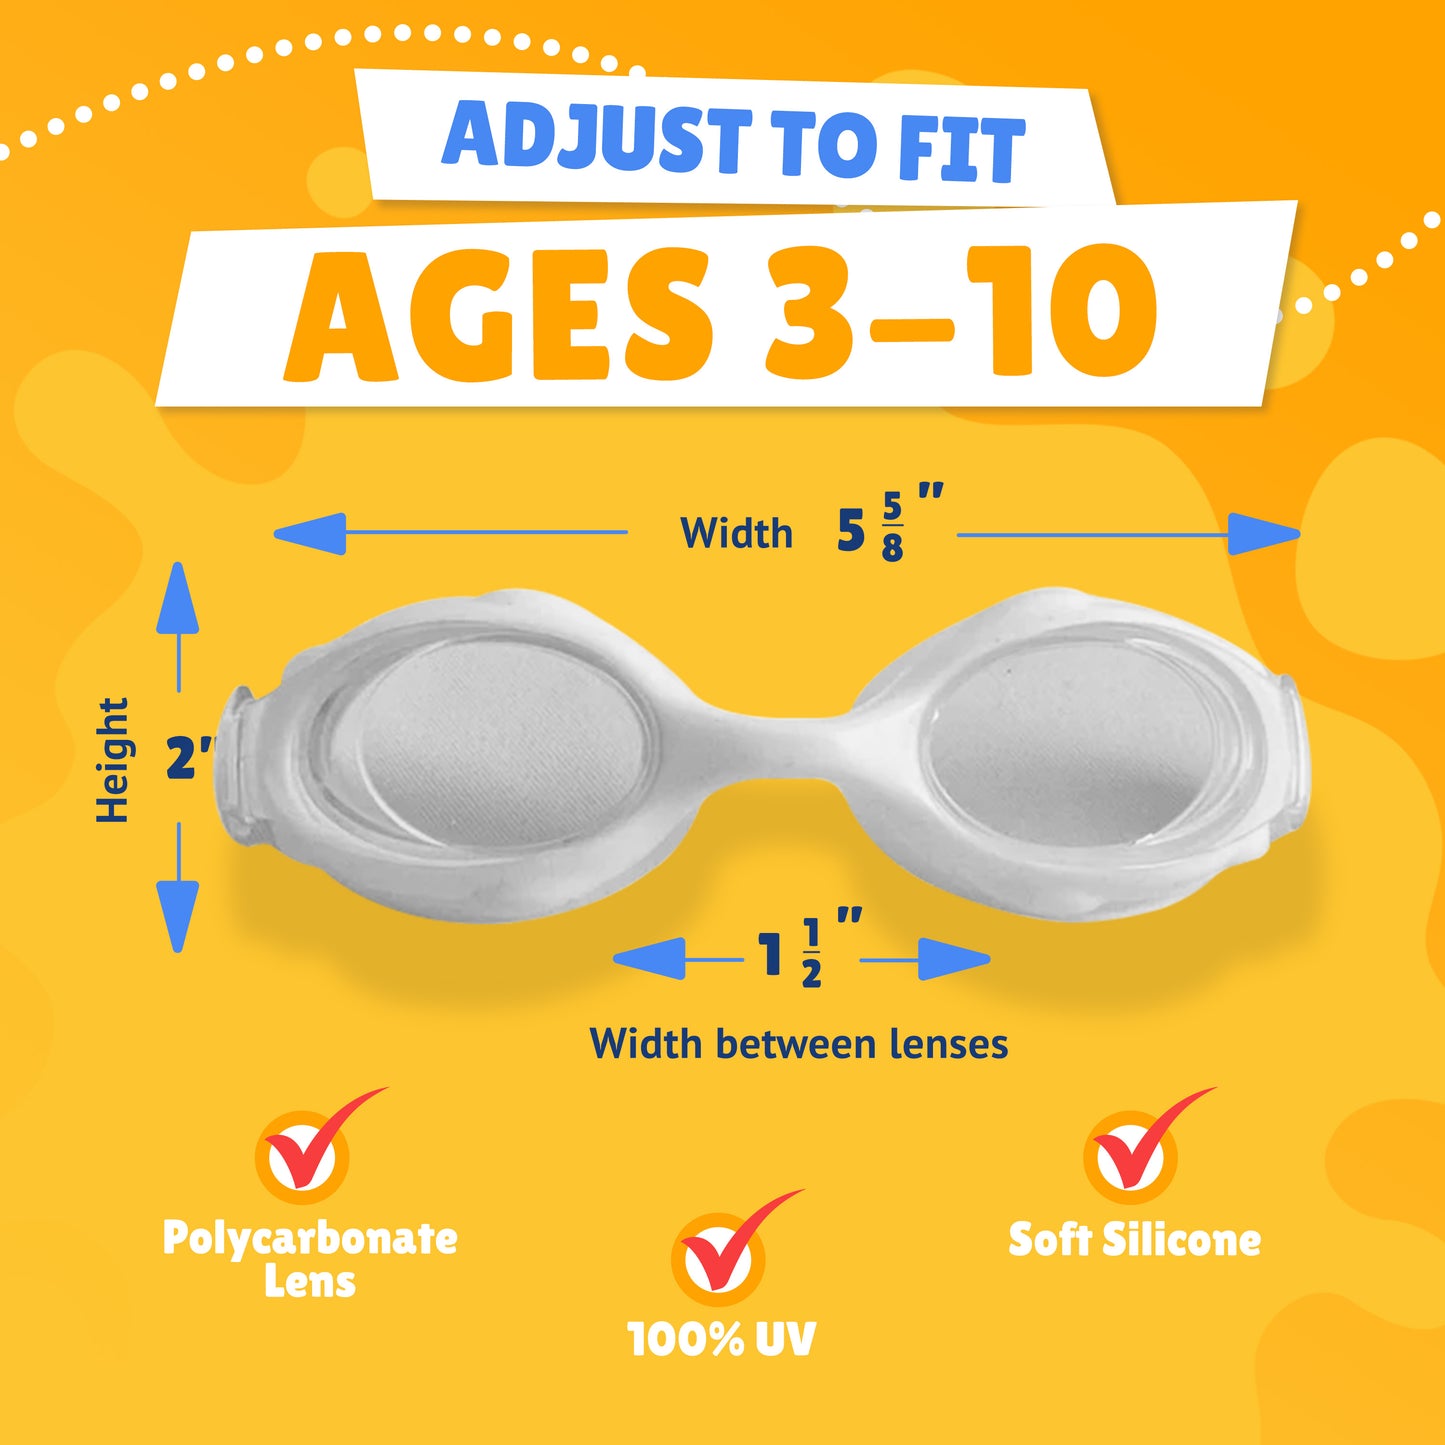 Pictured Lenses. Text reads: Adjust to fit ages 3-10. Polycarbonate lens, 100% UV, Soft Silicone. Measurements of goggles: width 5 5/8 inches. Height 2 inches. Width between lenses 1 1/2 inch lenses.